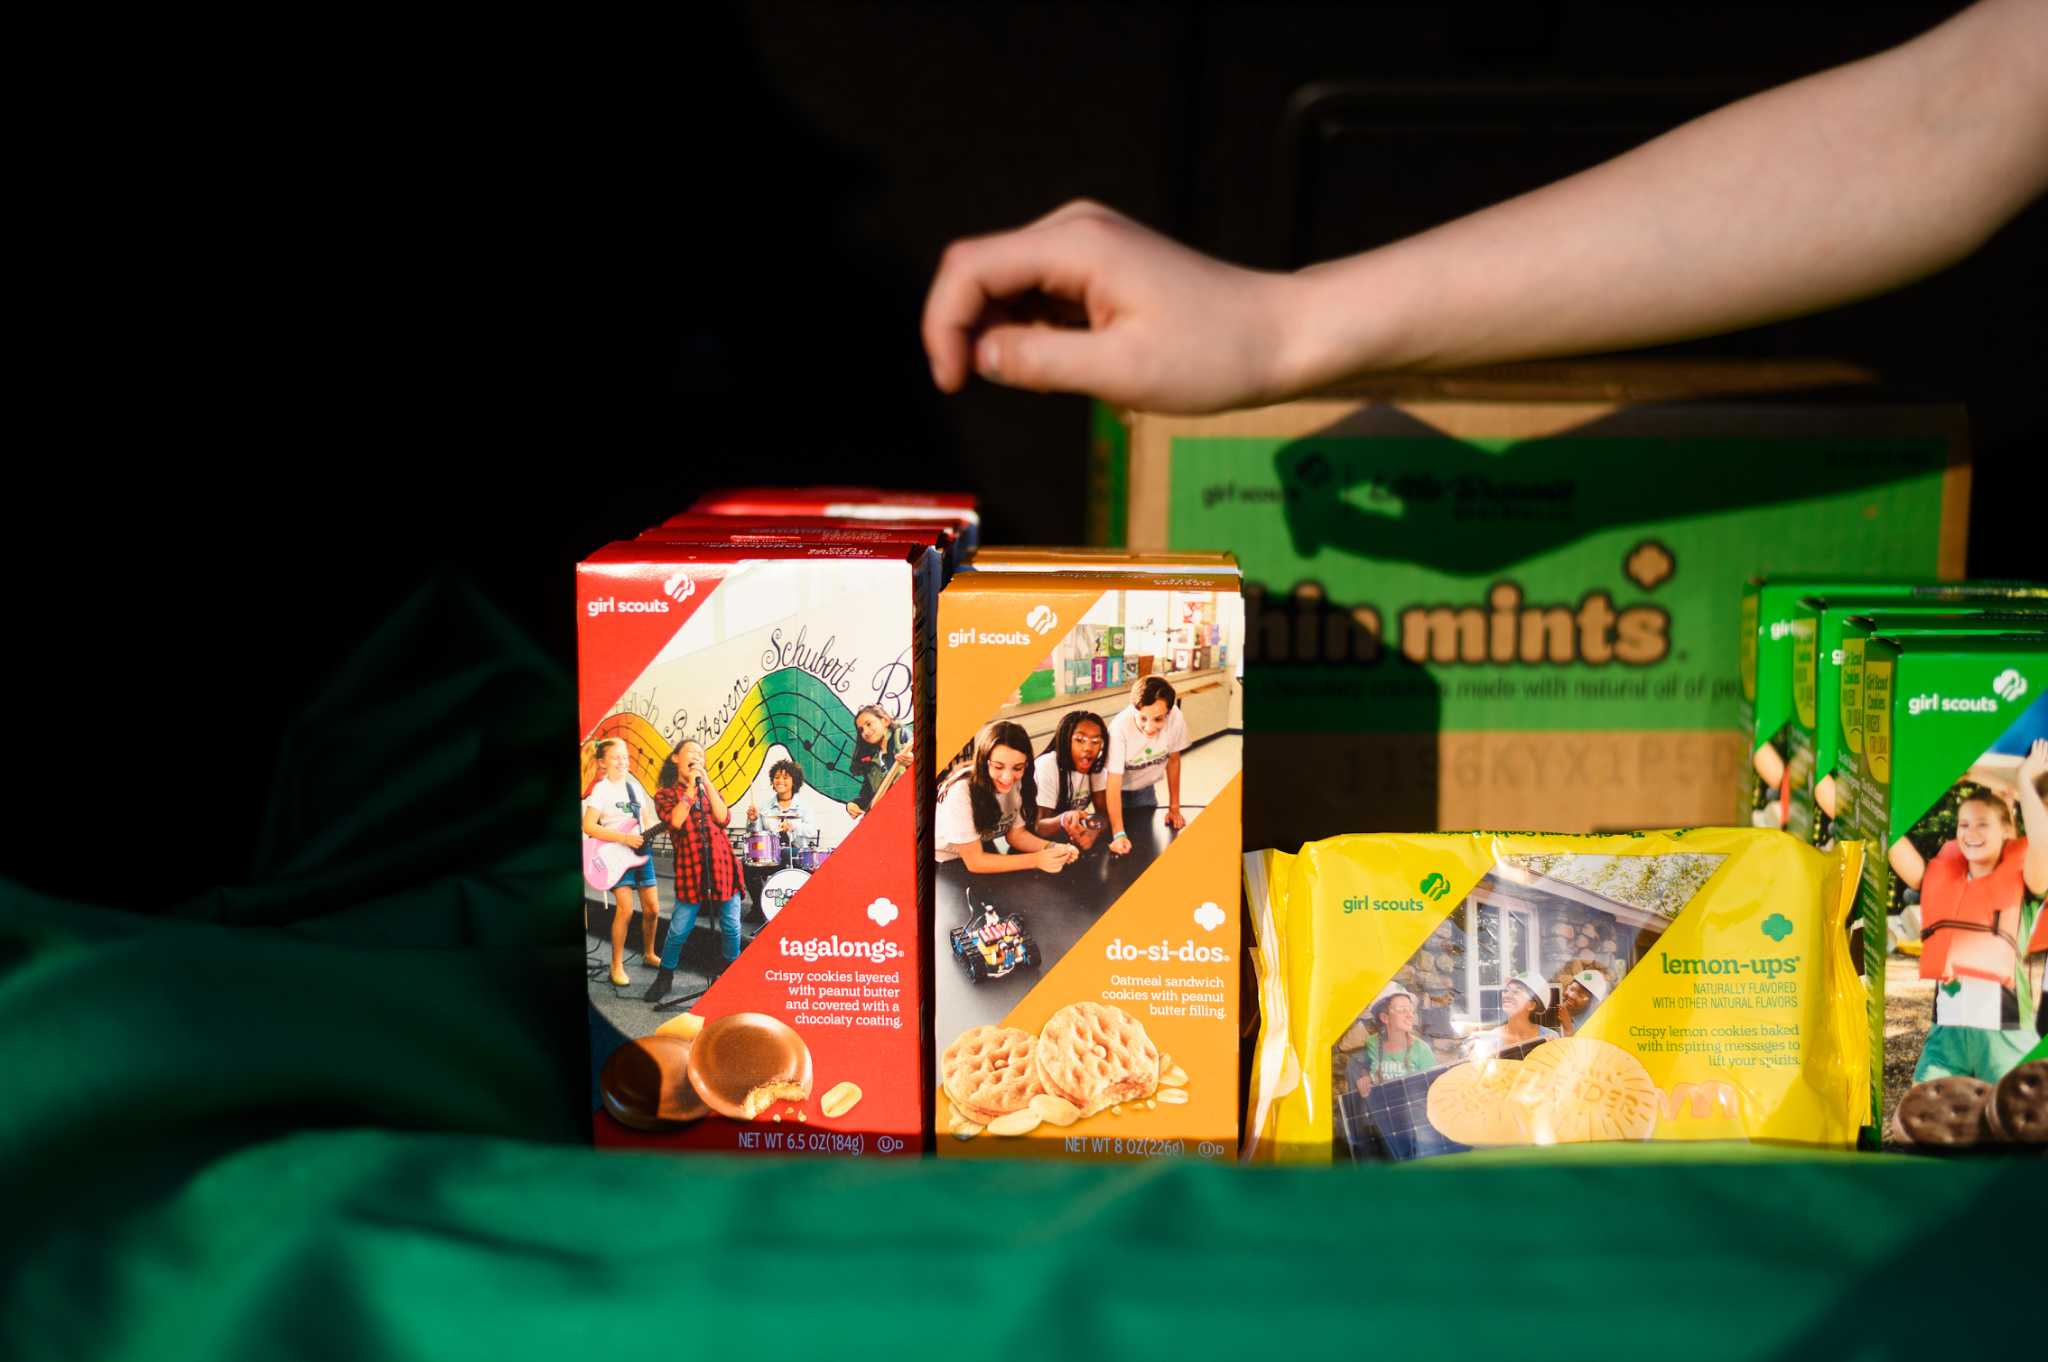 girl scout cookies box 2022